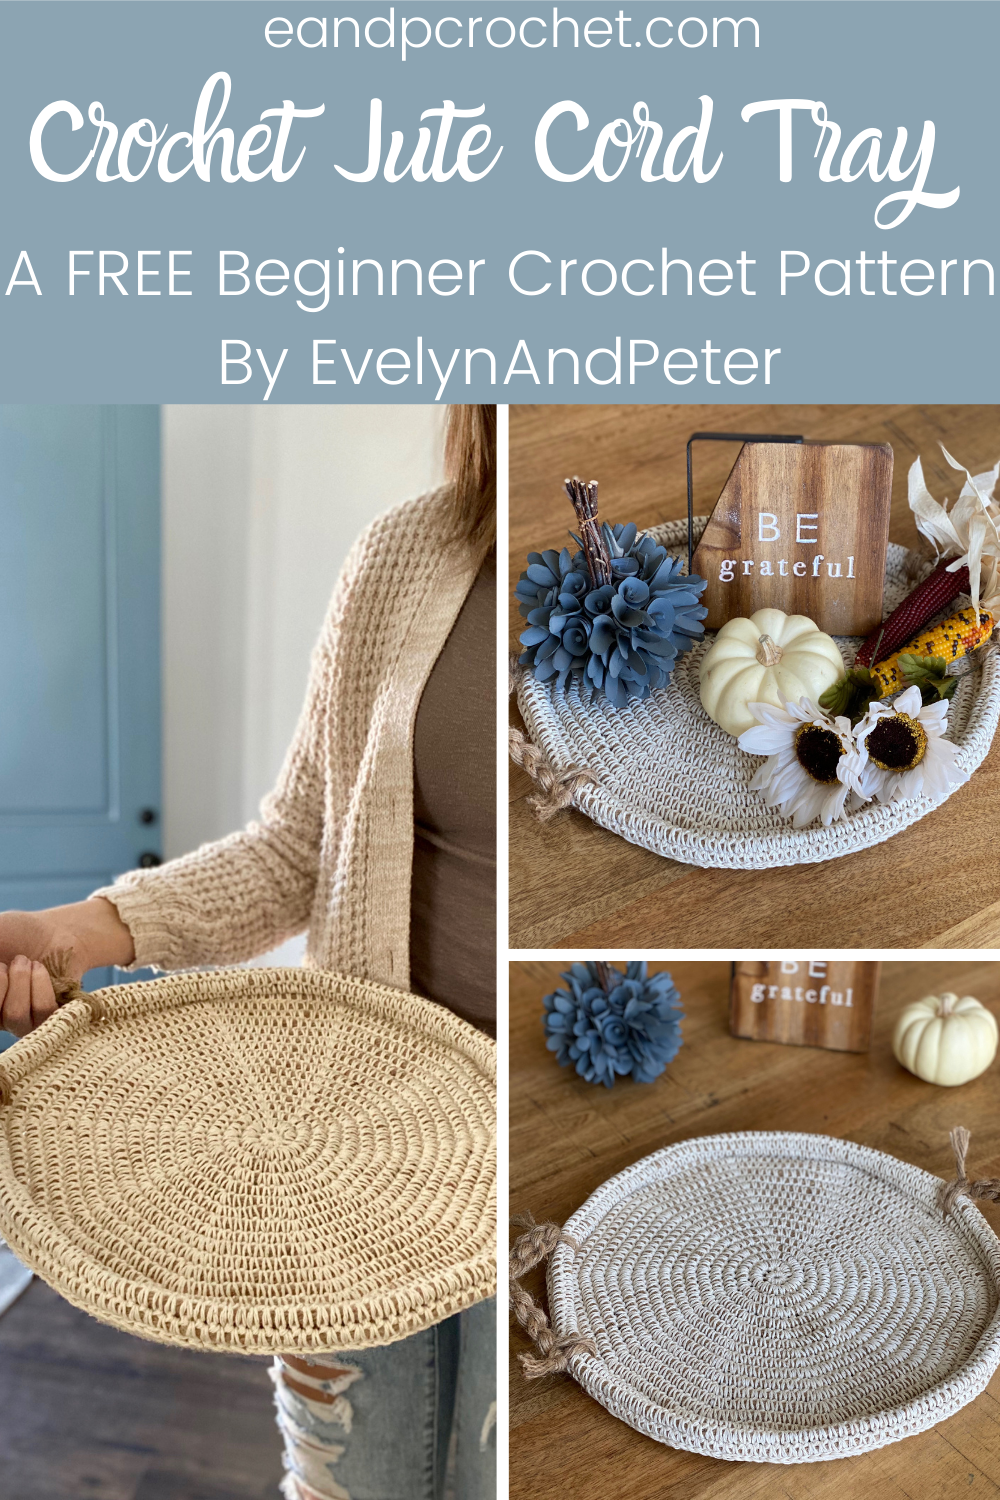 Crochet Jute Cord Tray - Evelyn And Peter Crochet